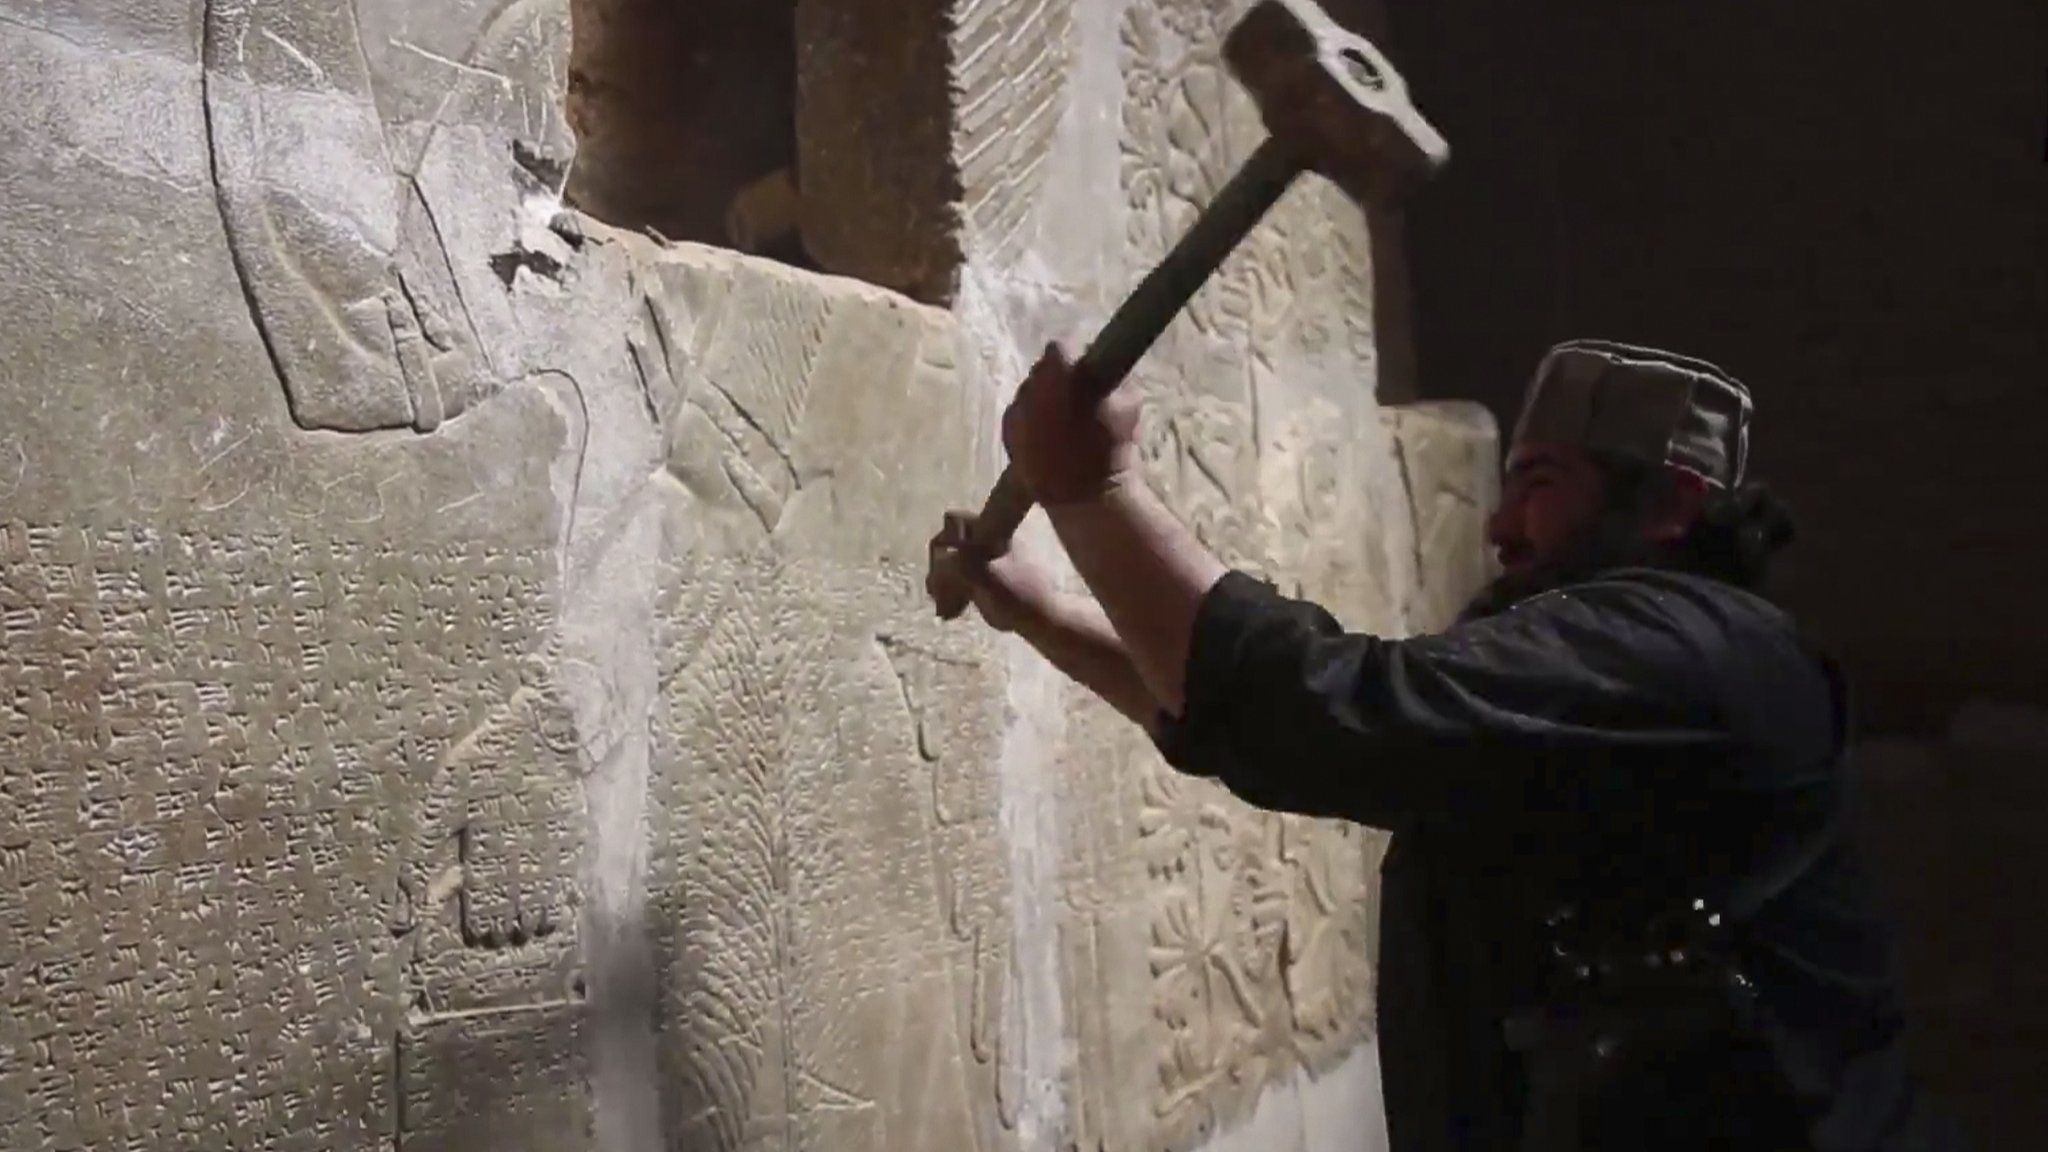 IS image from April 2015 reportedly showing militant taking a sledgehammer to an Assyrian relief